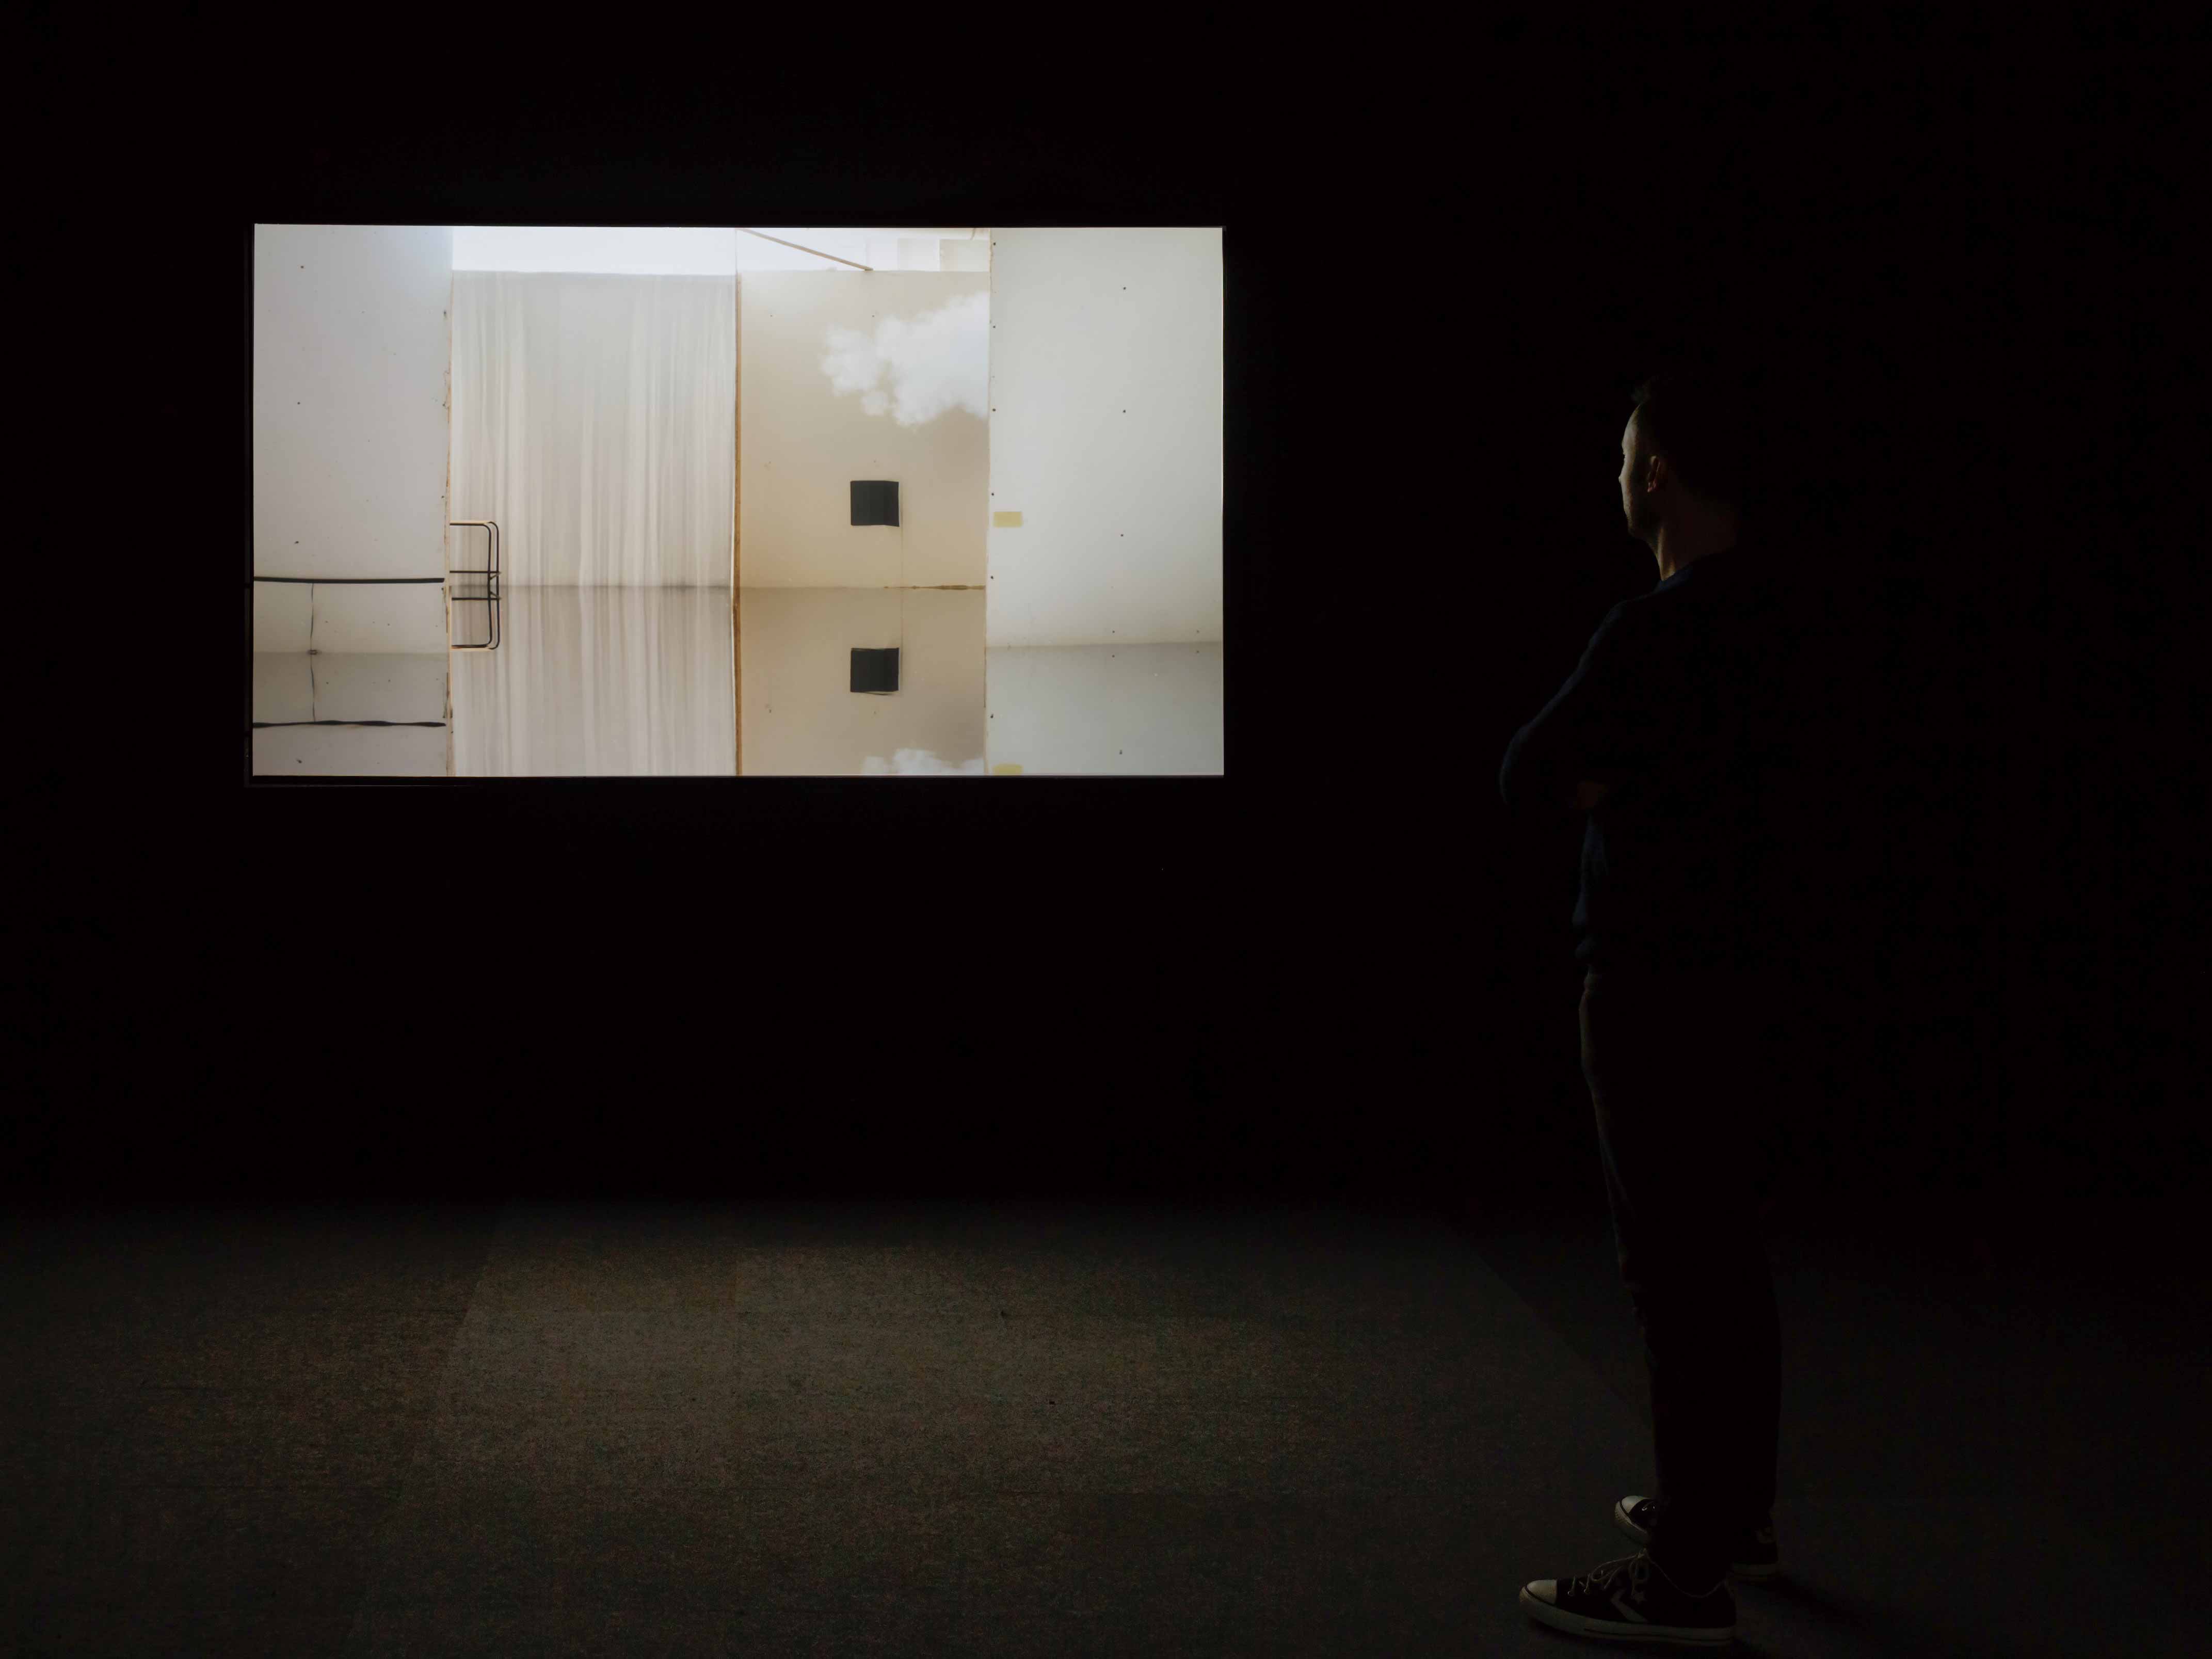 Ailbhe Ní Bhriain 'Reports to an Academy' four channel installation, video & cgi composite, colour, sound, looped, 2015; installation view at The Royal Hibernian Academy, Dublin, Ireland, curated by Patrick T. Murphy, photograph by Mike Hannon